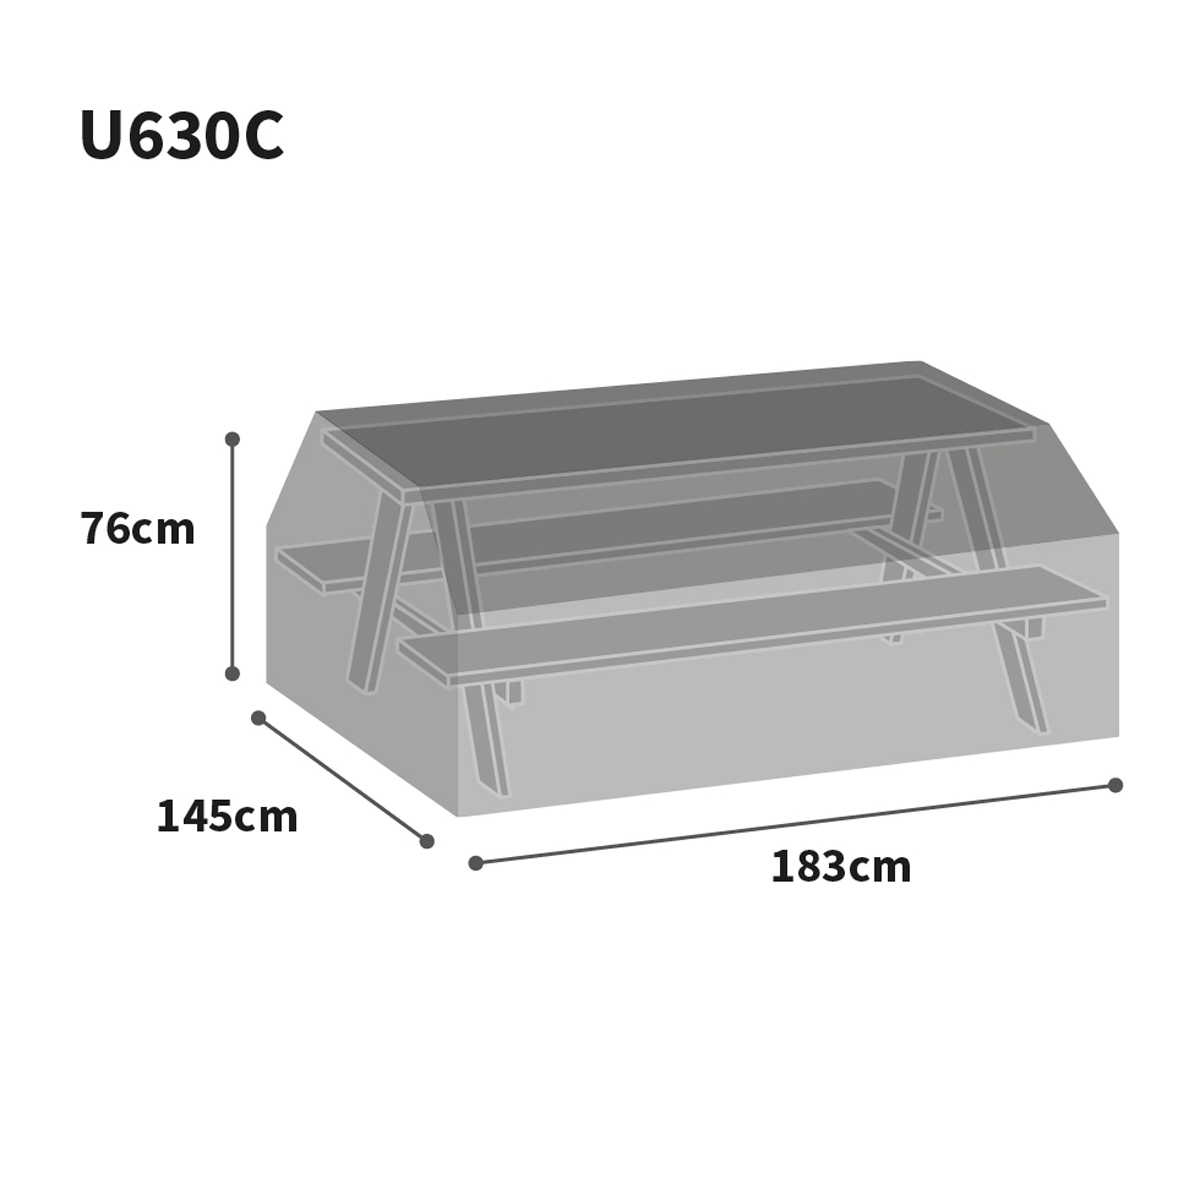 Bosmere Ultimate Protector Picnic Table Cover Graphic Size Guide